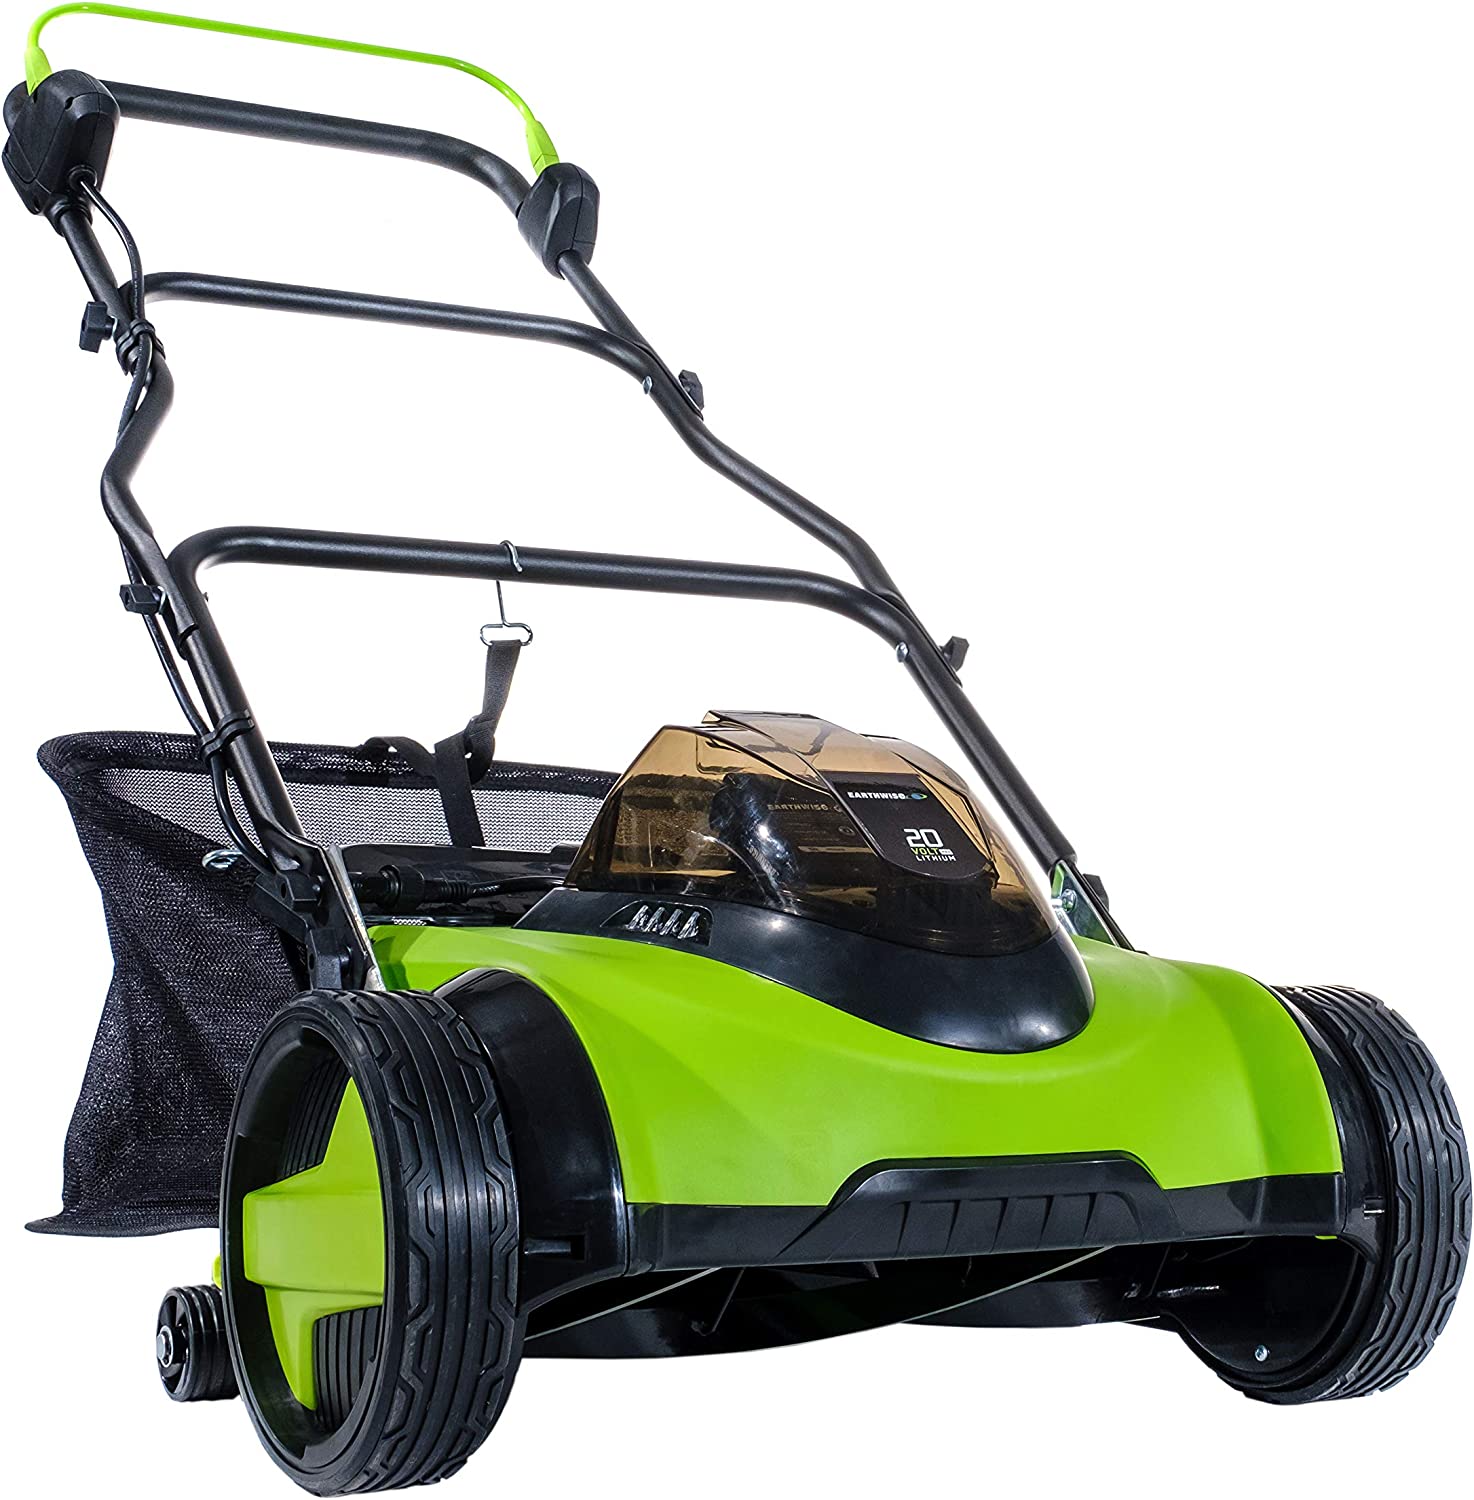 Earthwise Power Tools by ALM 2120-16 20-Volt 16-Inch Electric Cordless Reel Lawn Mower, 2.0Ah Battery & Fast Charger Included